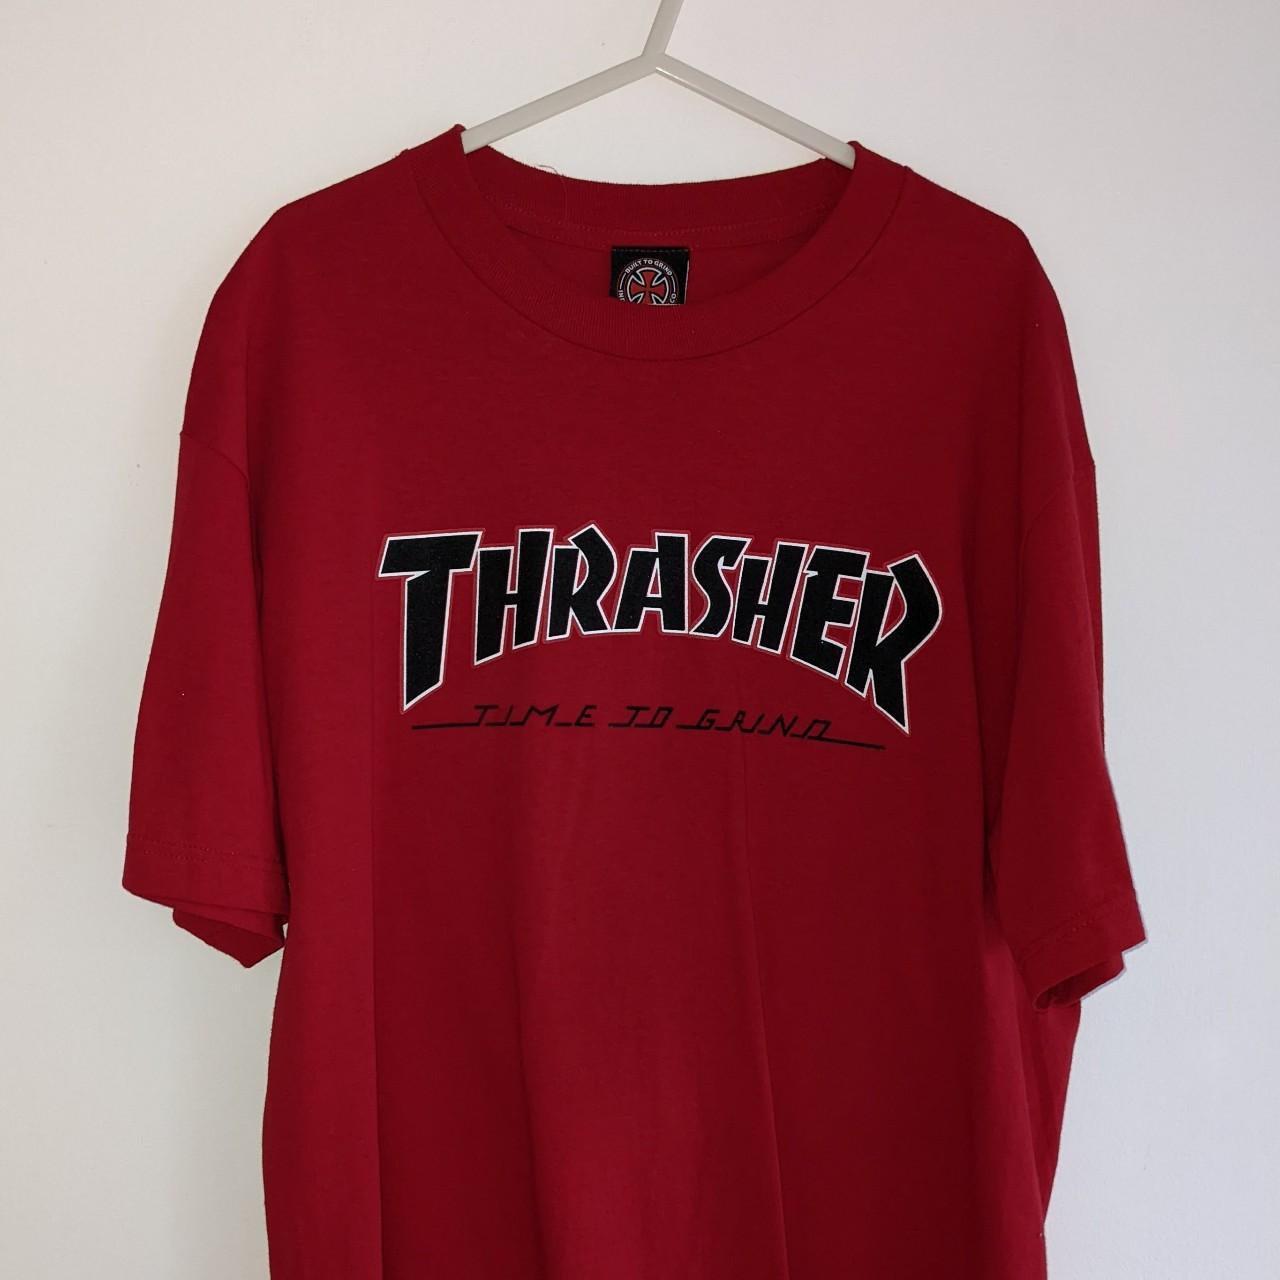 Thrasher x Independent Truck Co tee 🤙, 'Time to